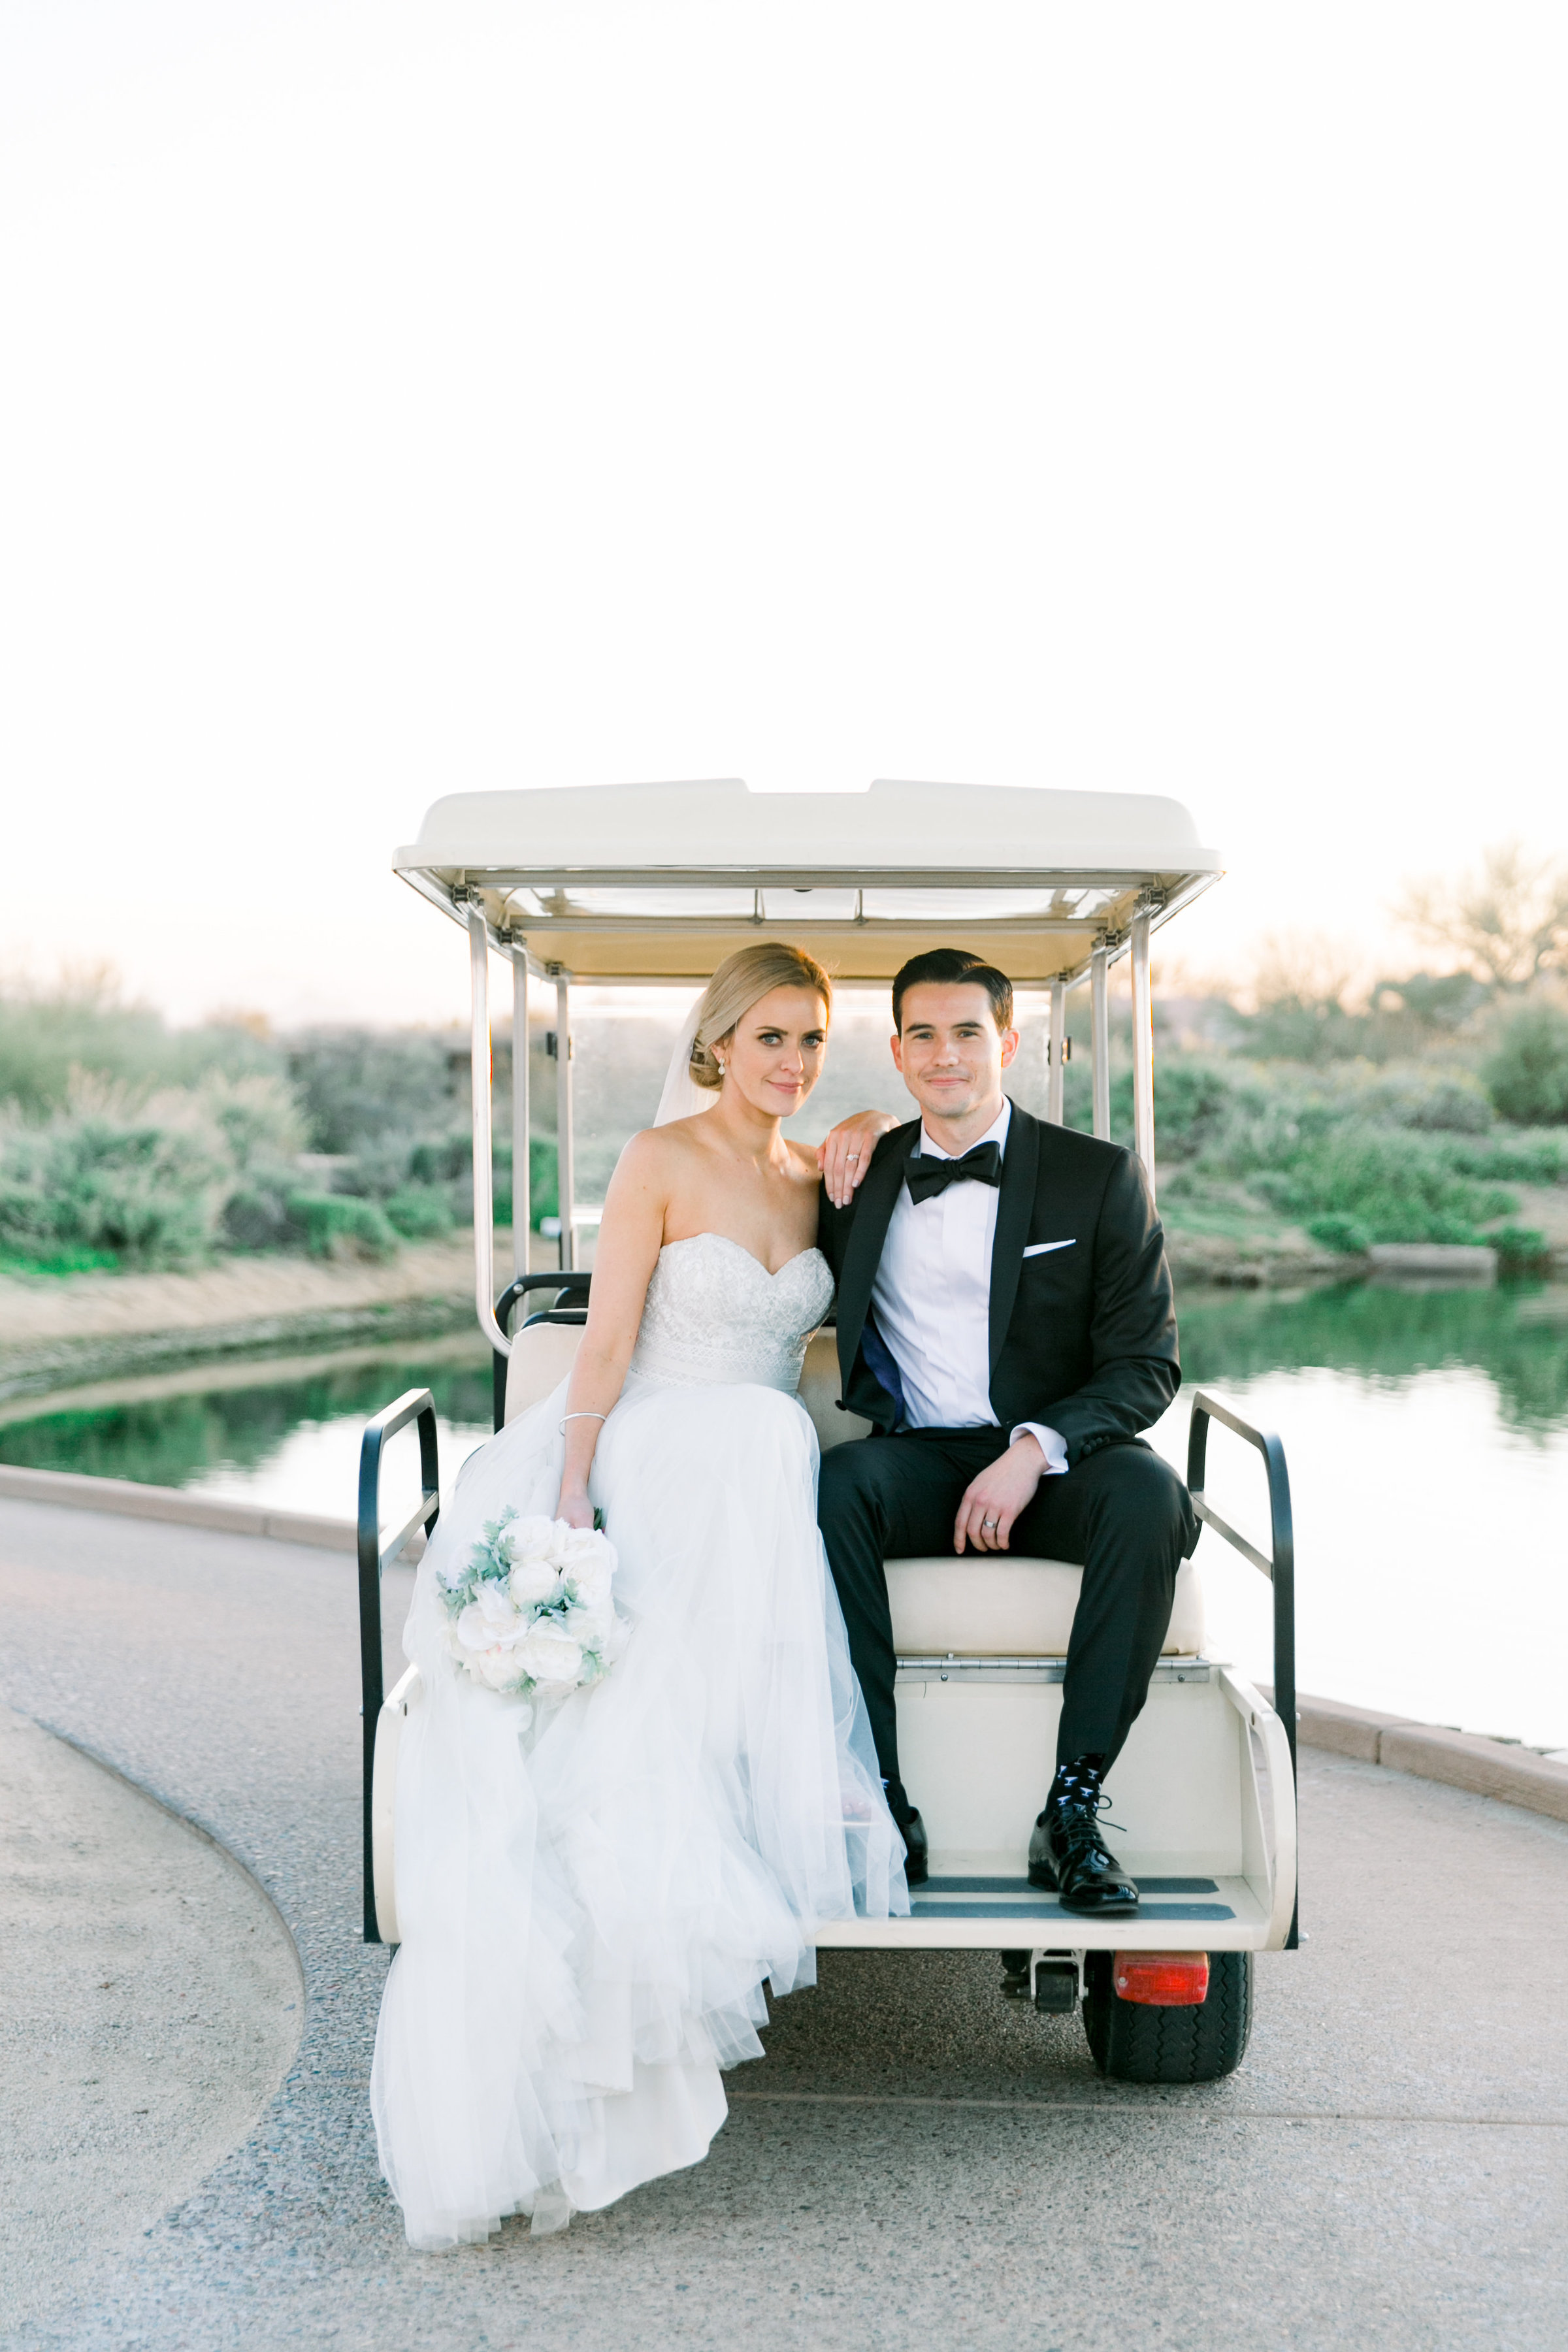 Karlie Colleen Photography - Arizona Wedding at The Troon Scottsdale Country Club - Paige & Shane -738